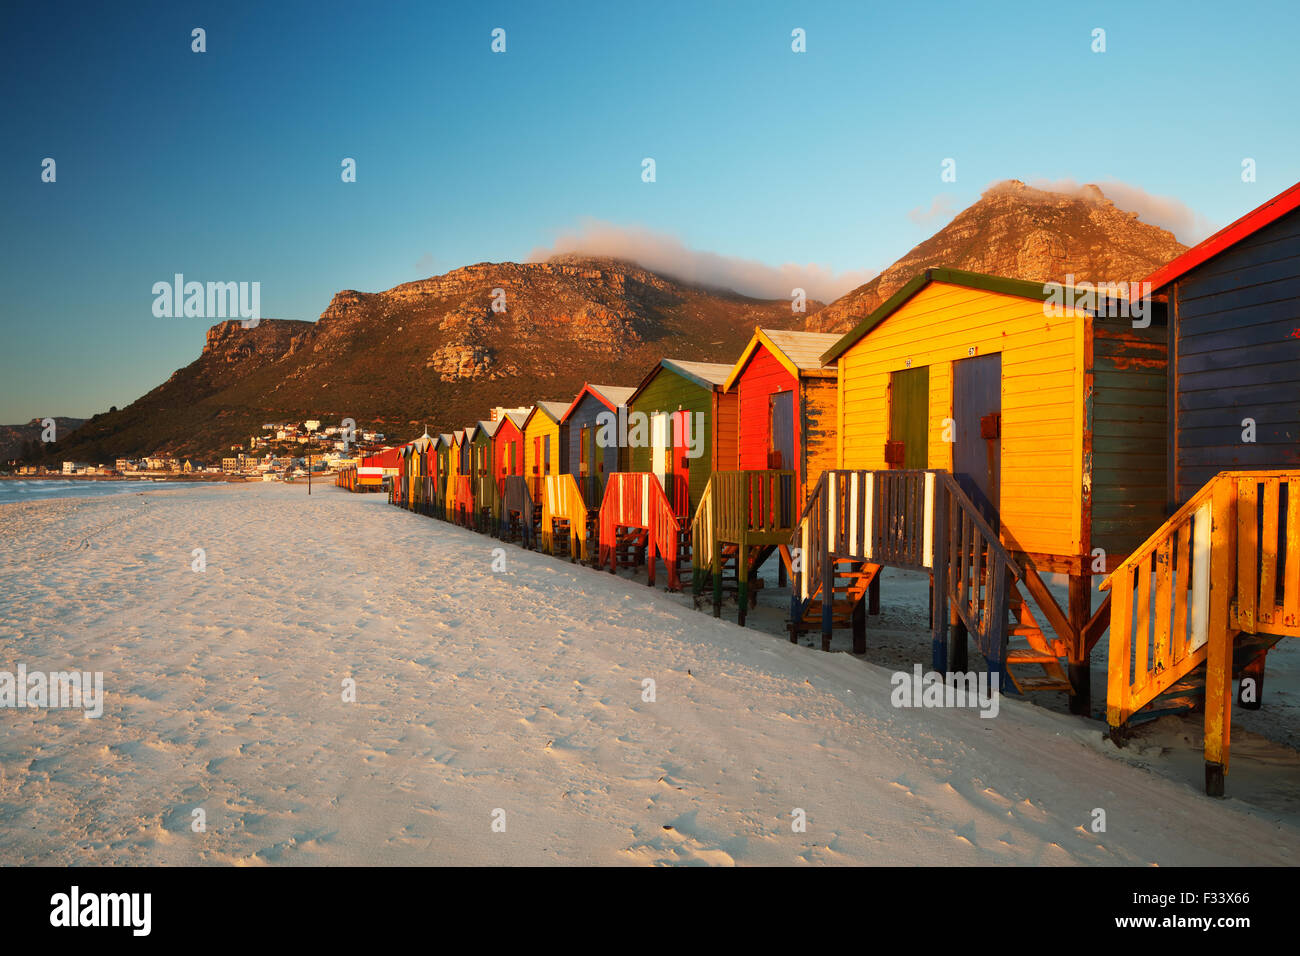 beach huts on Muizenberg Beach, Cape Town, South Africa Stock Photo